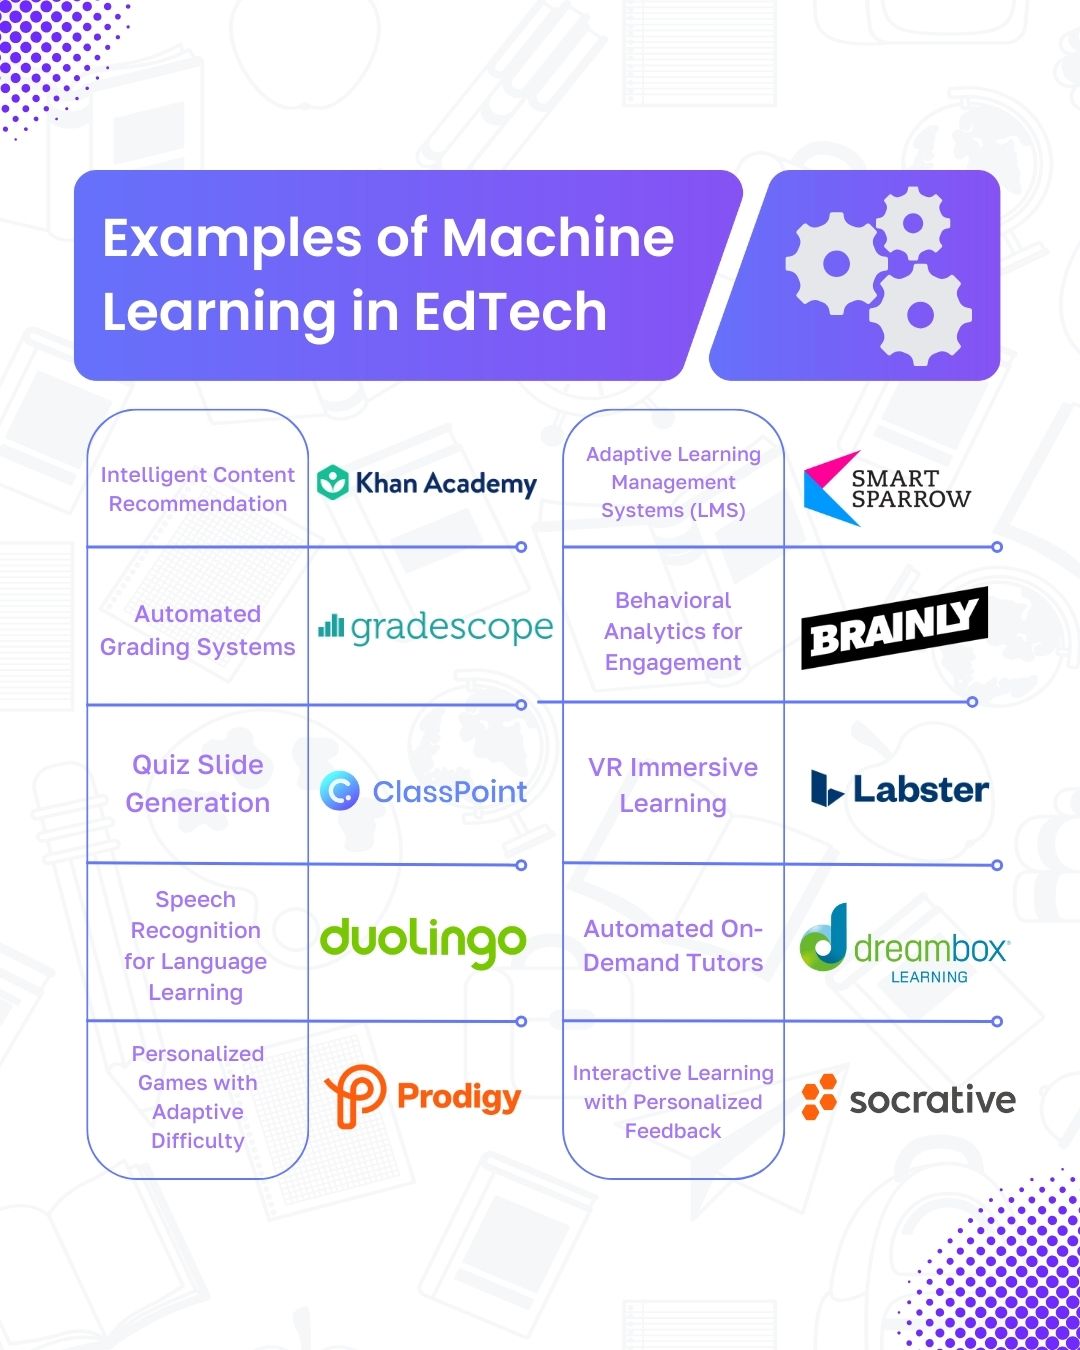 Machine learning examples in education, specifically EdTech